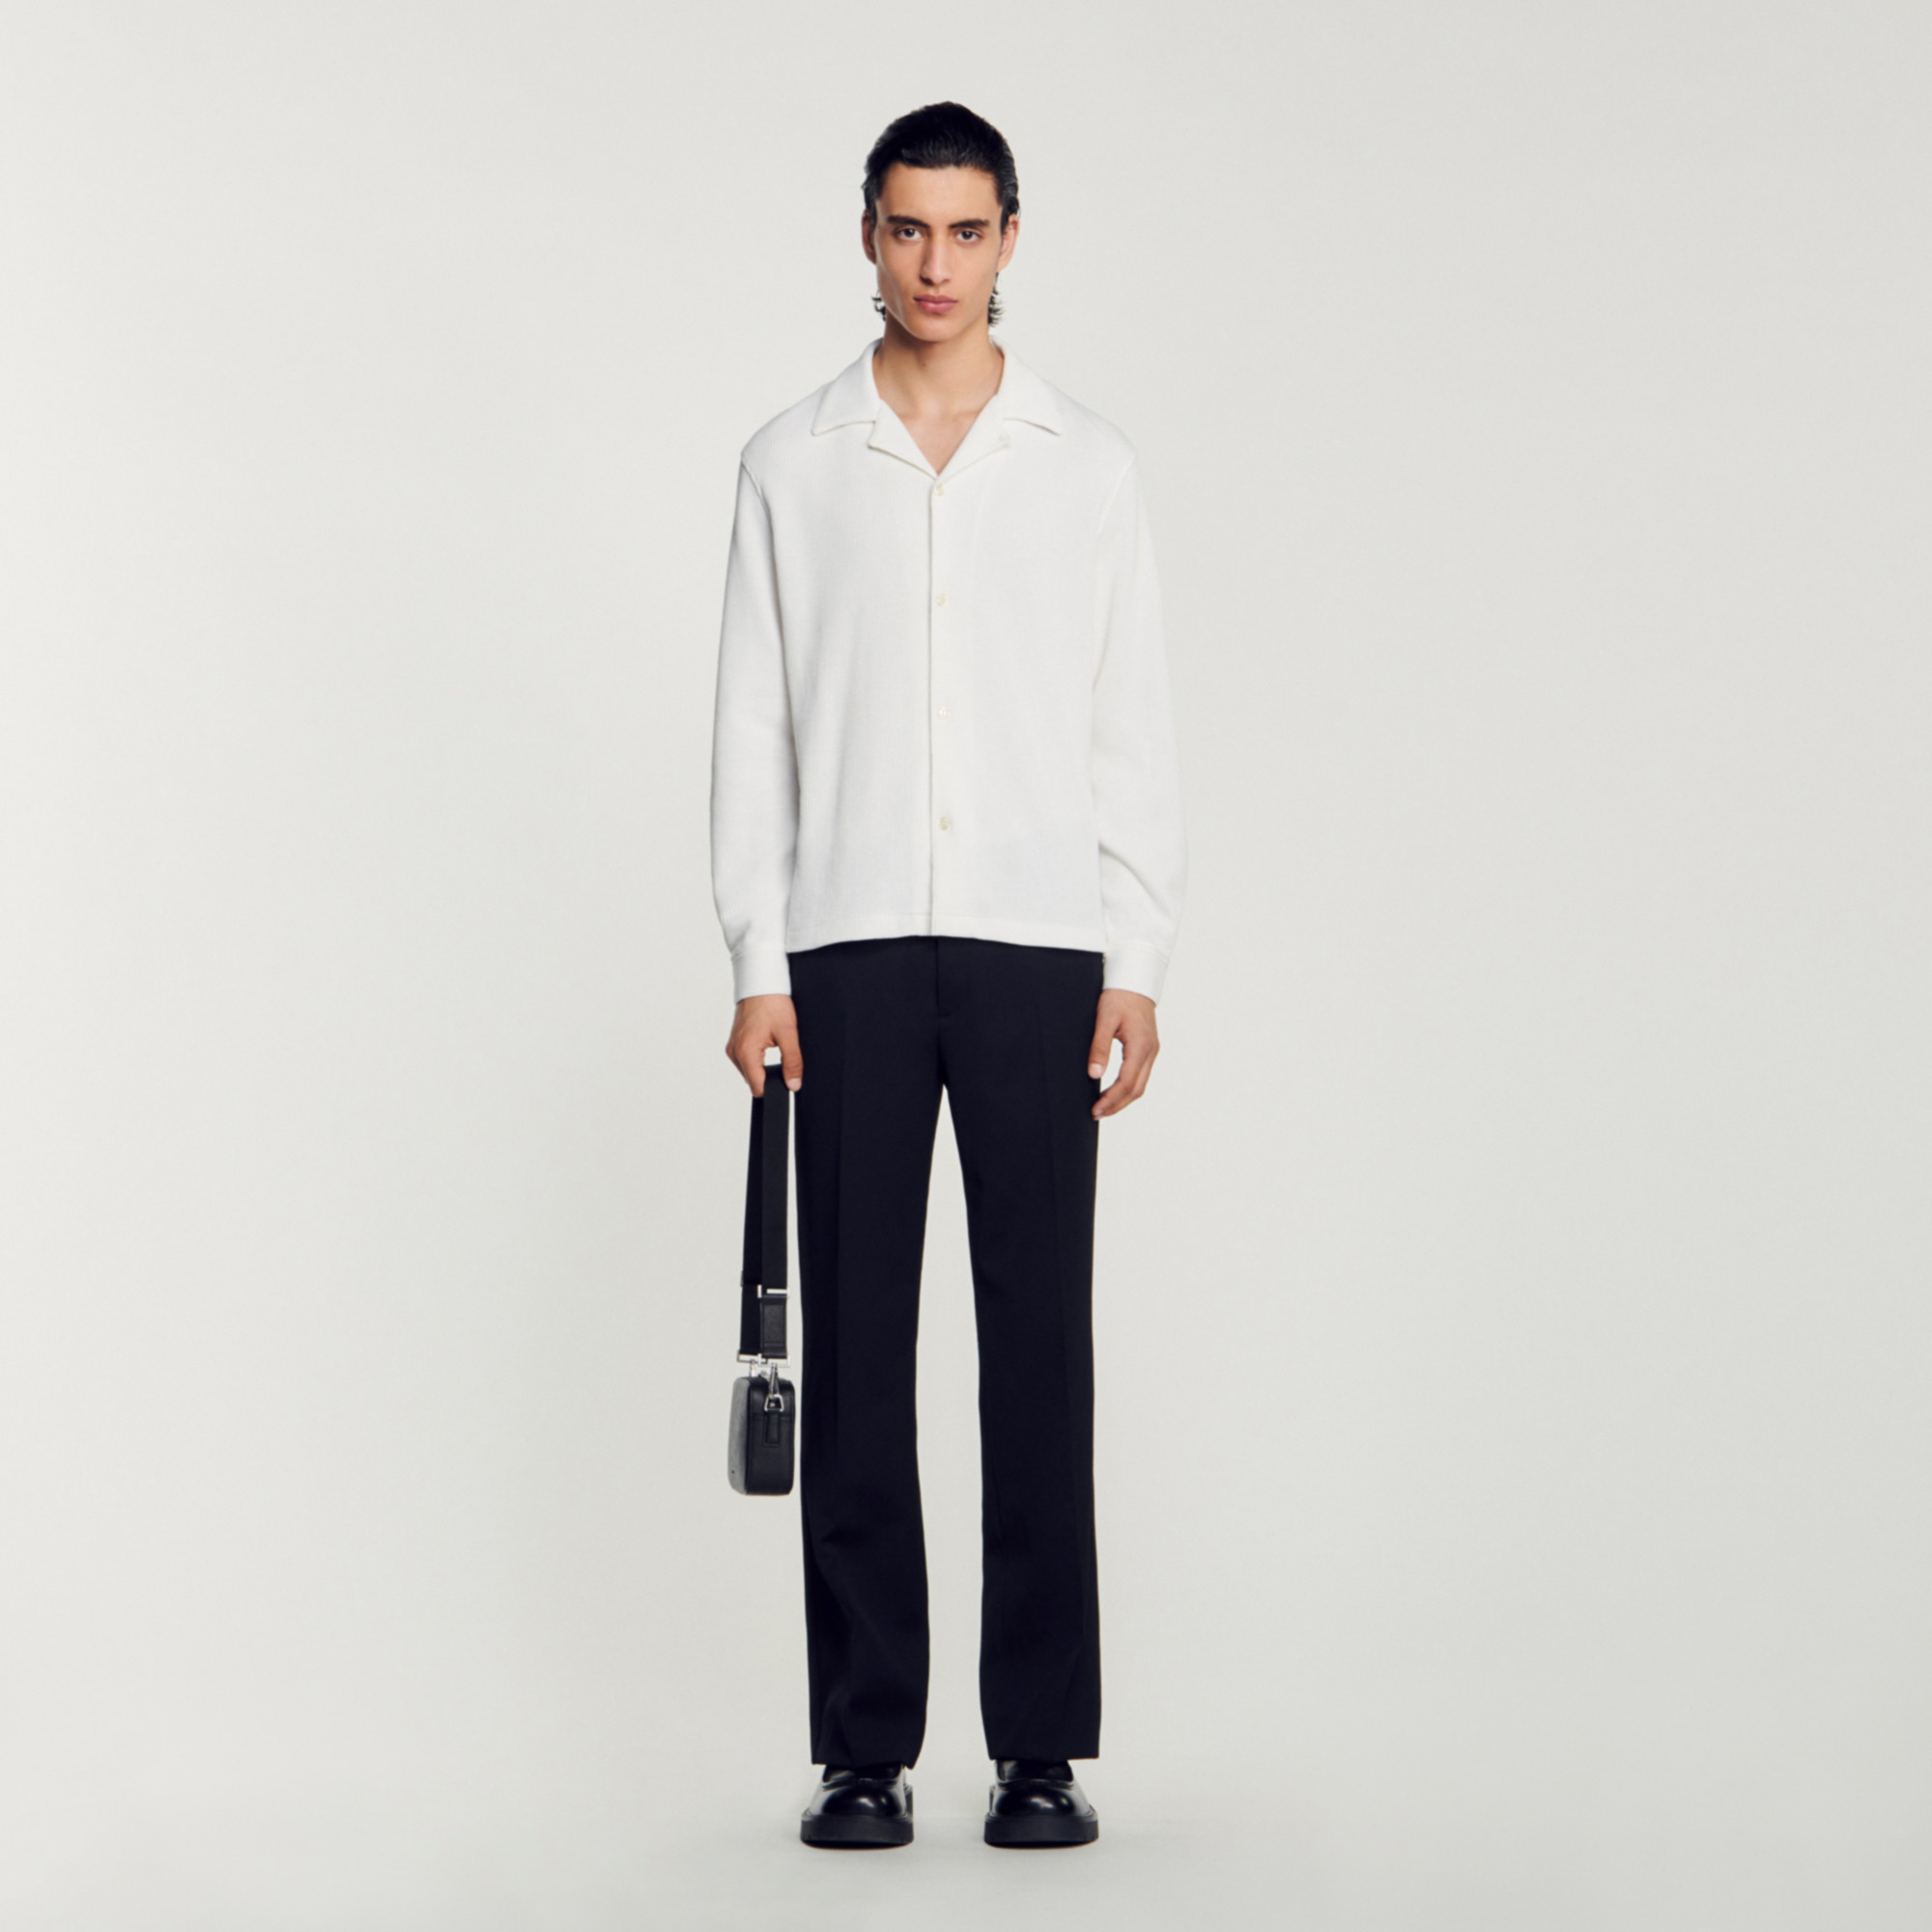 Sandro polyester Long-sleeve shirt of textured fabric with a button fastening and a spread collar